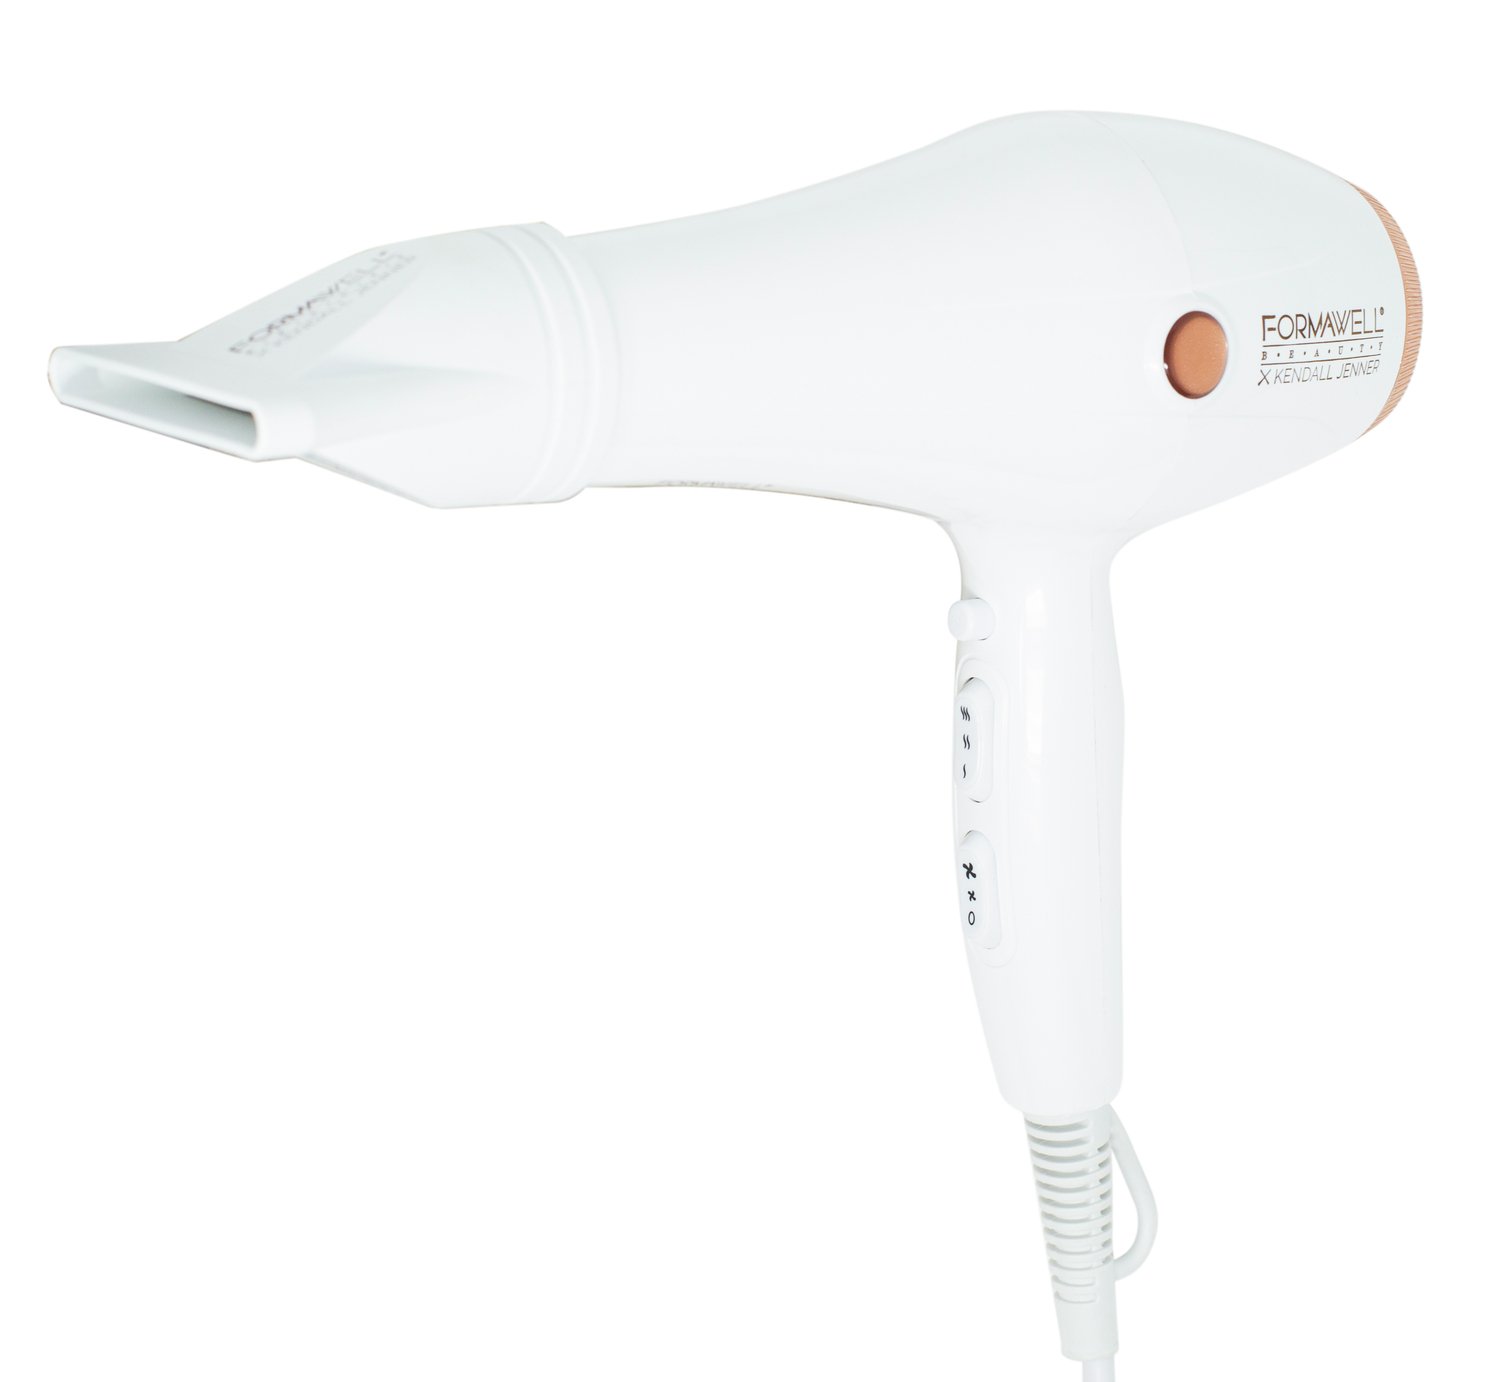 Formawell X Kendall Jenner Gold Fusion Hair Dryer